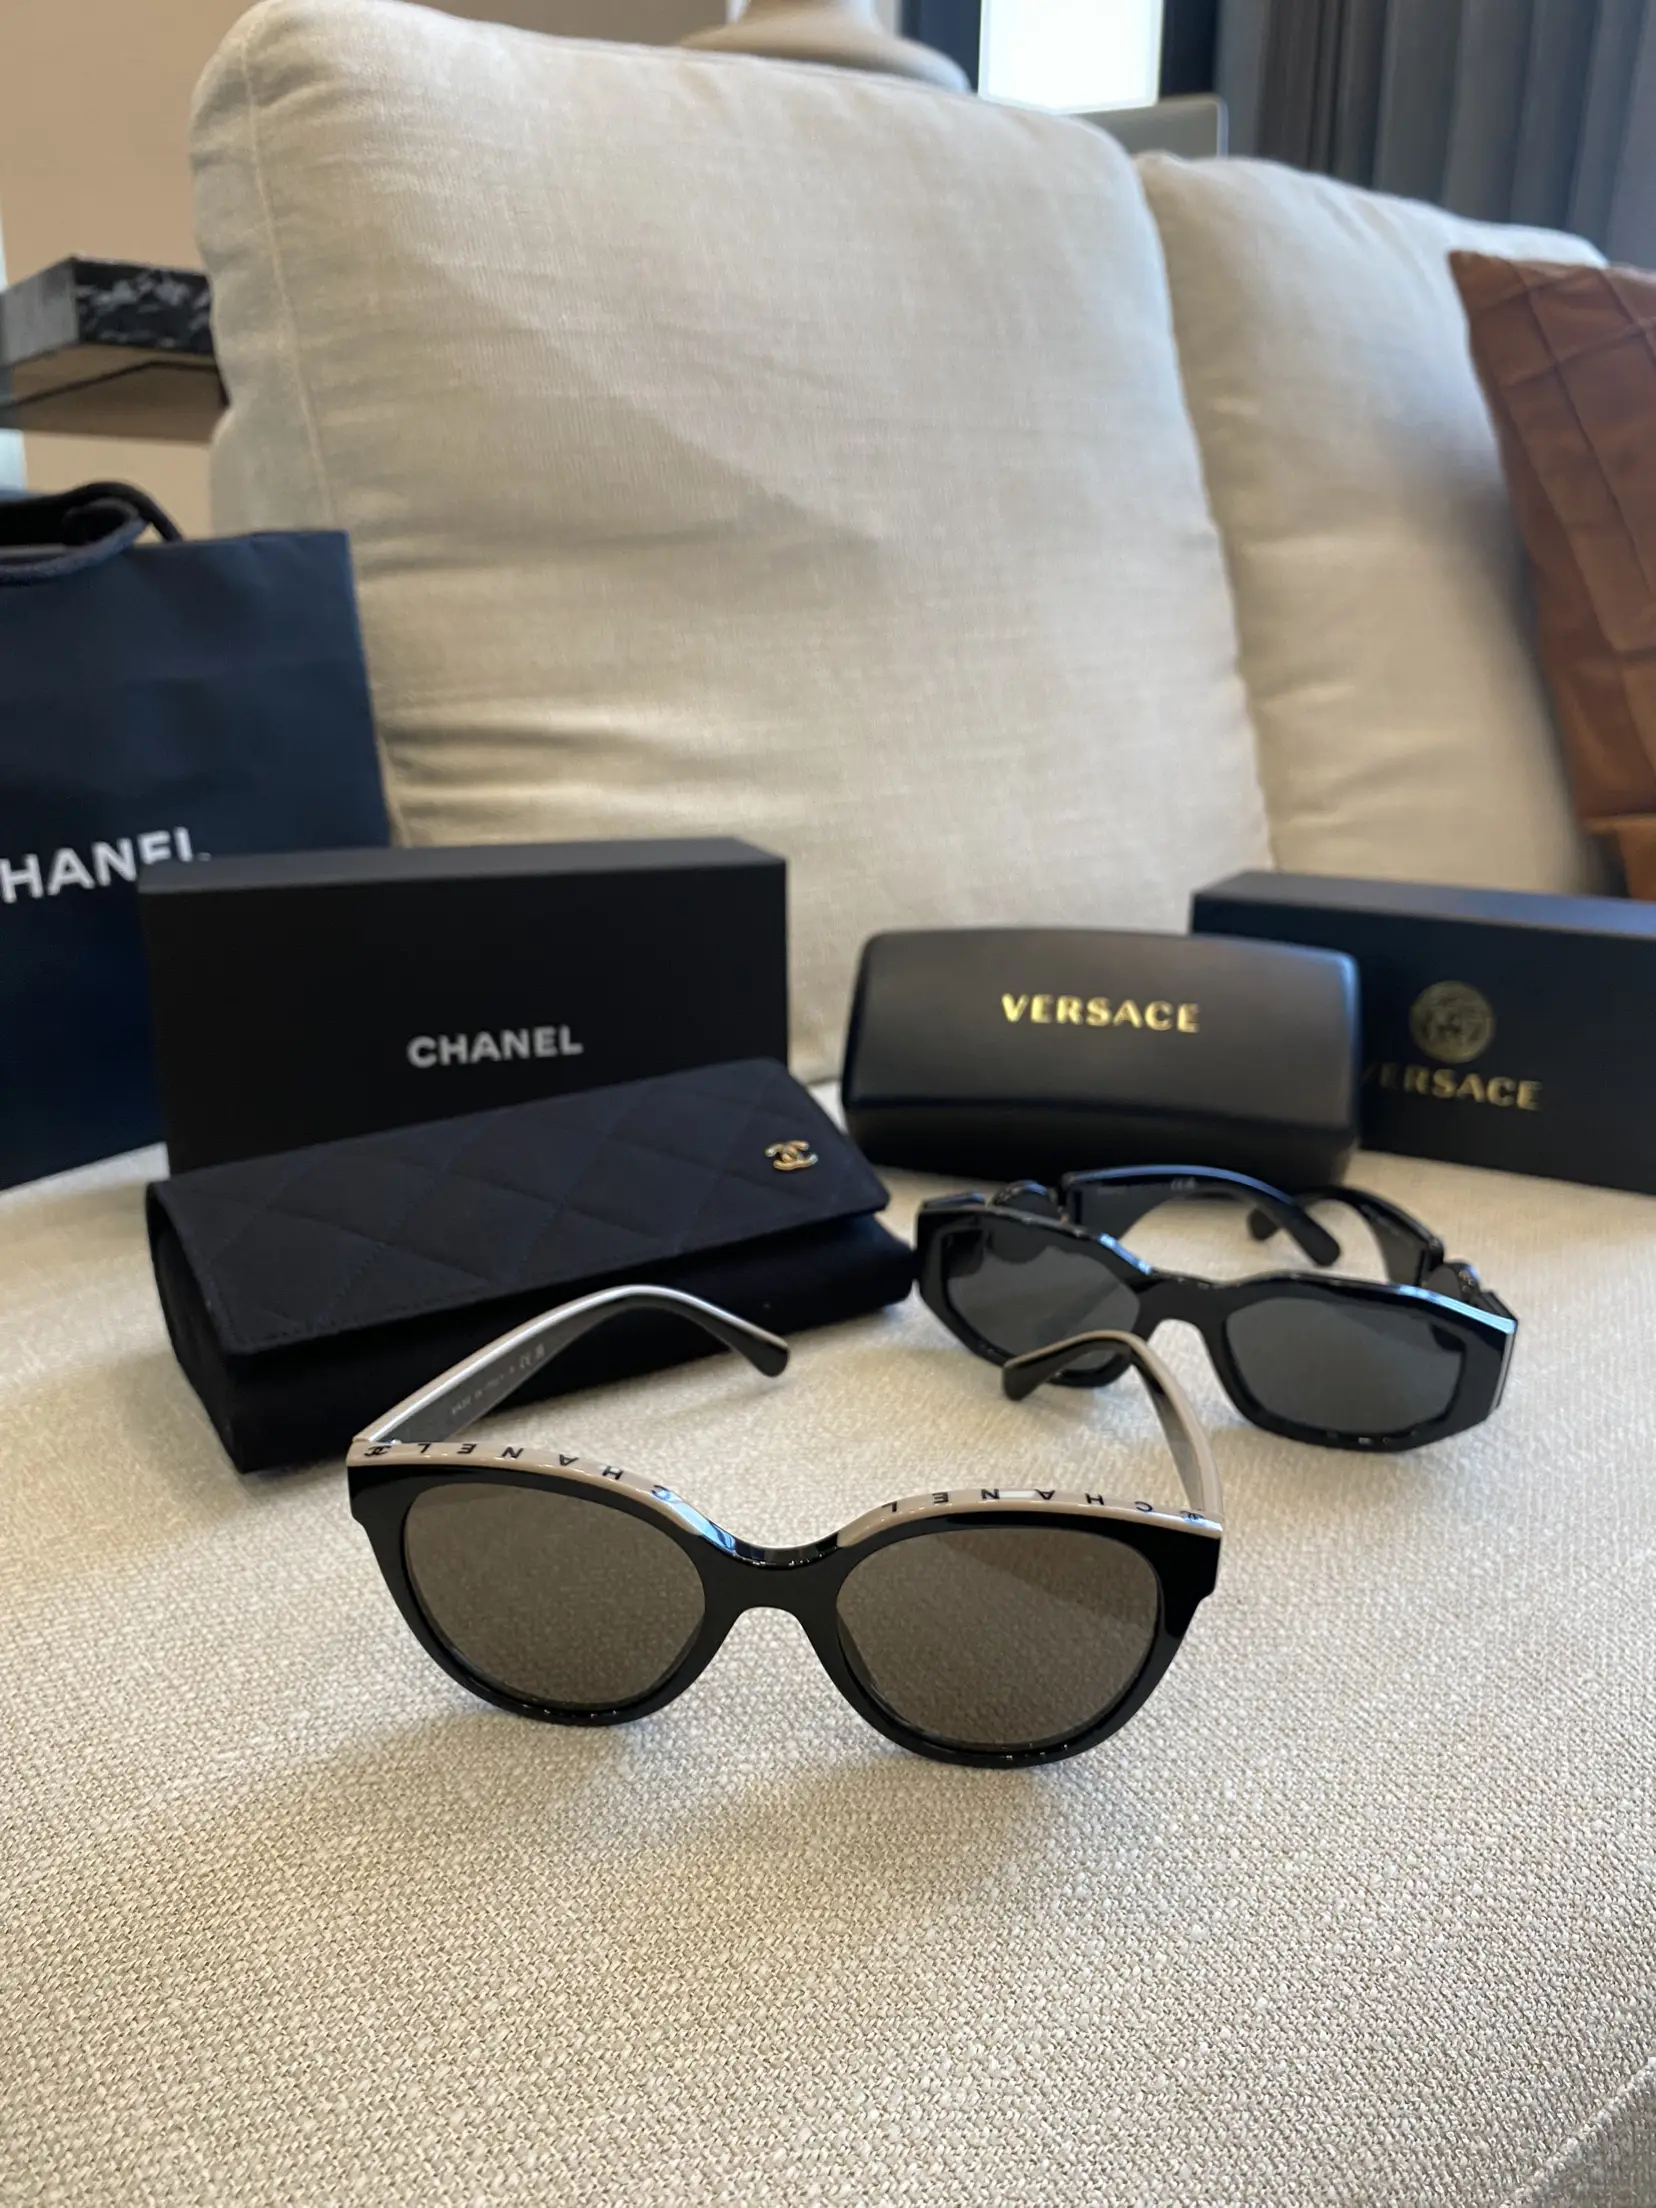 Shop CHANEL Unisex Street Style Military Skater Style Sunglasses by Kaswool